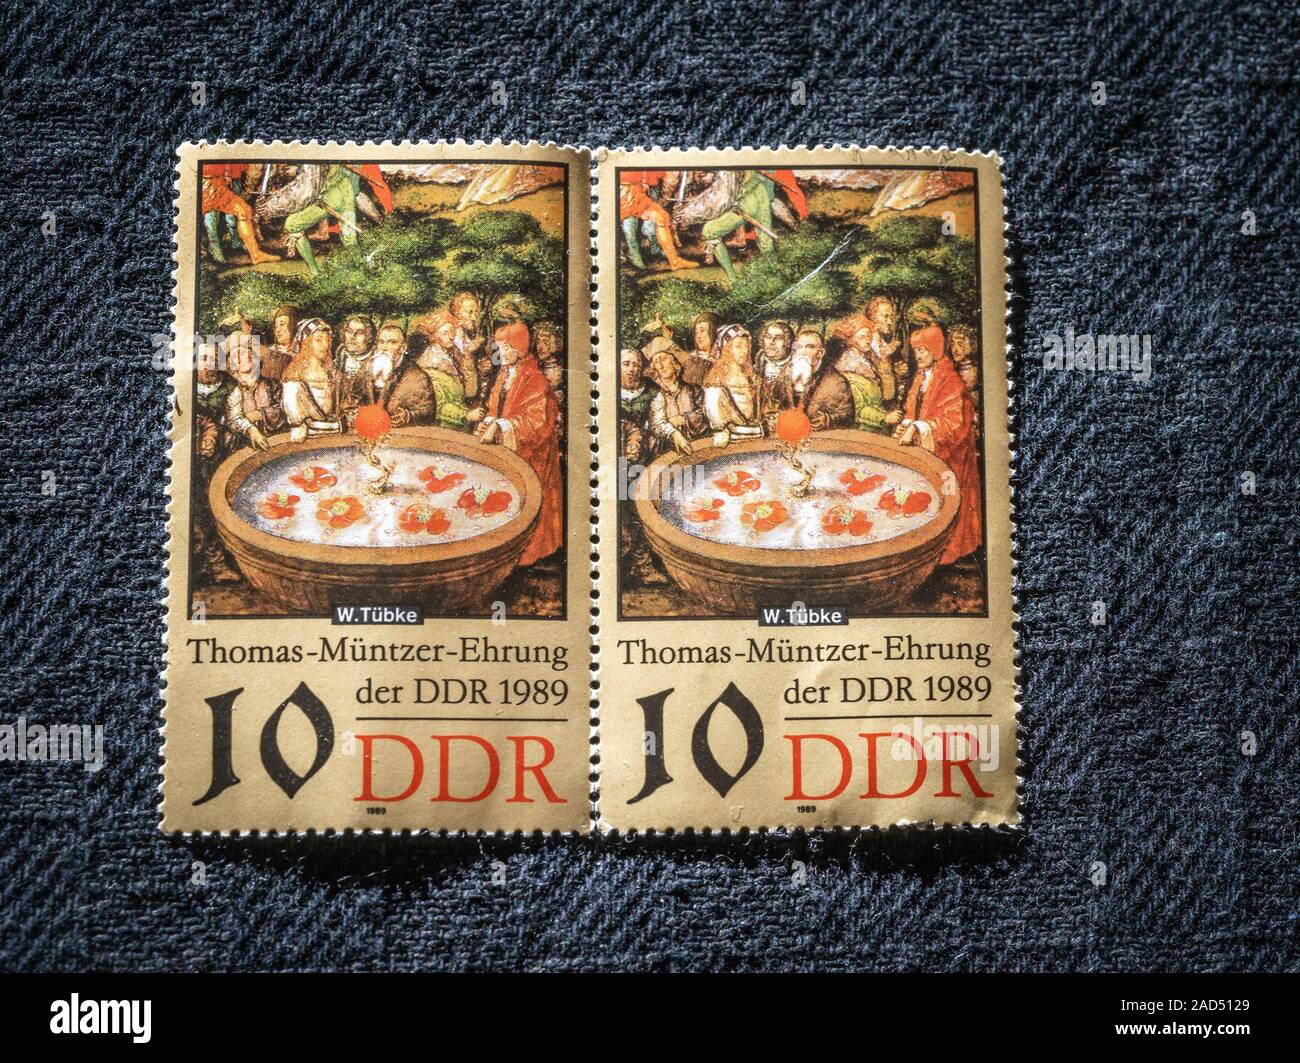 A set of Thomas Muentzer Ehrung 1989 DDR 10 Pfenning stamps Stock Photo